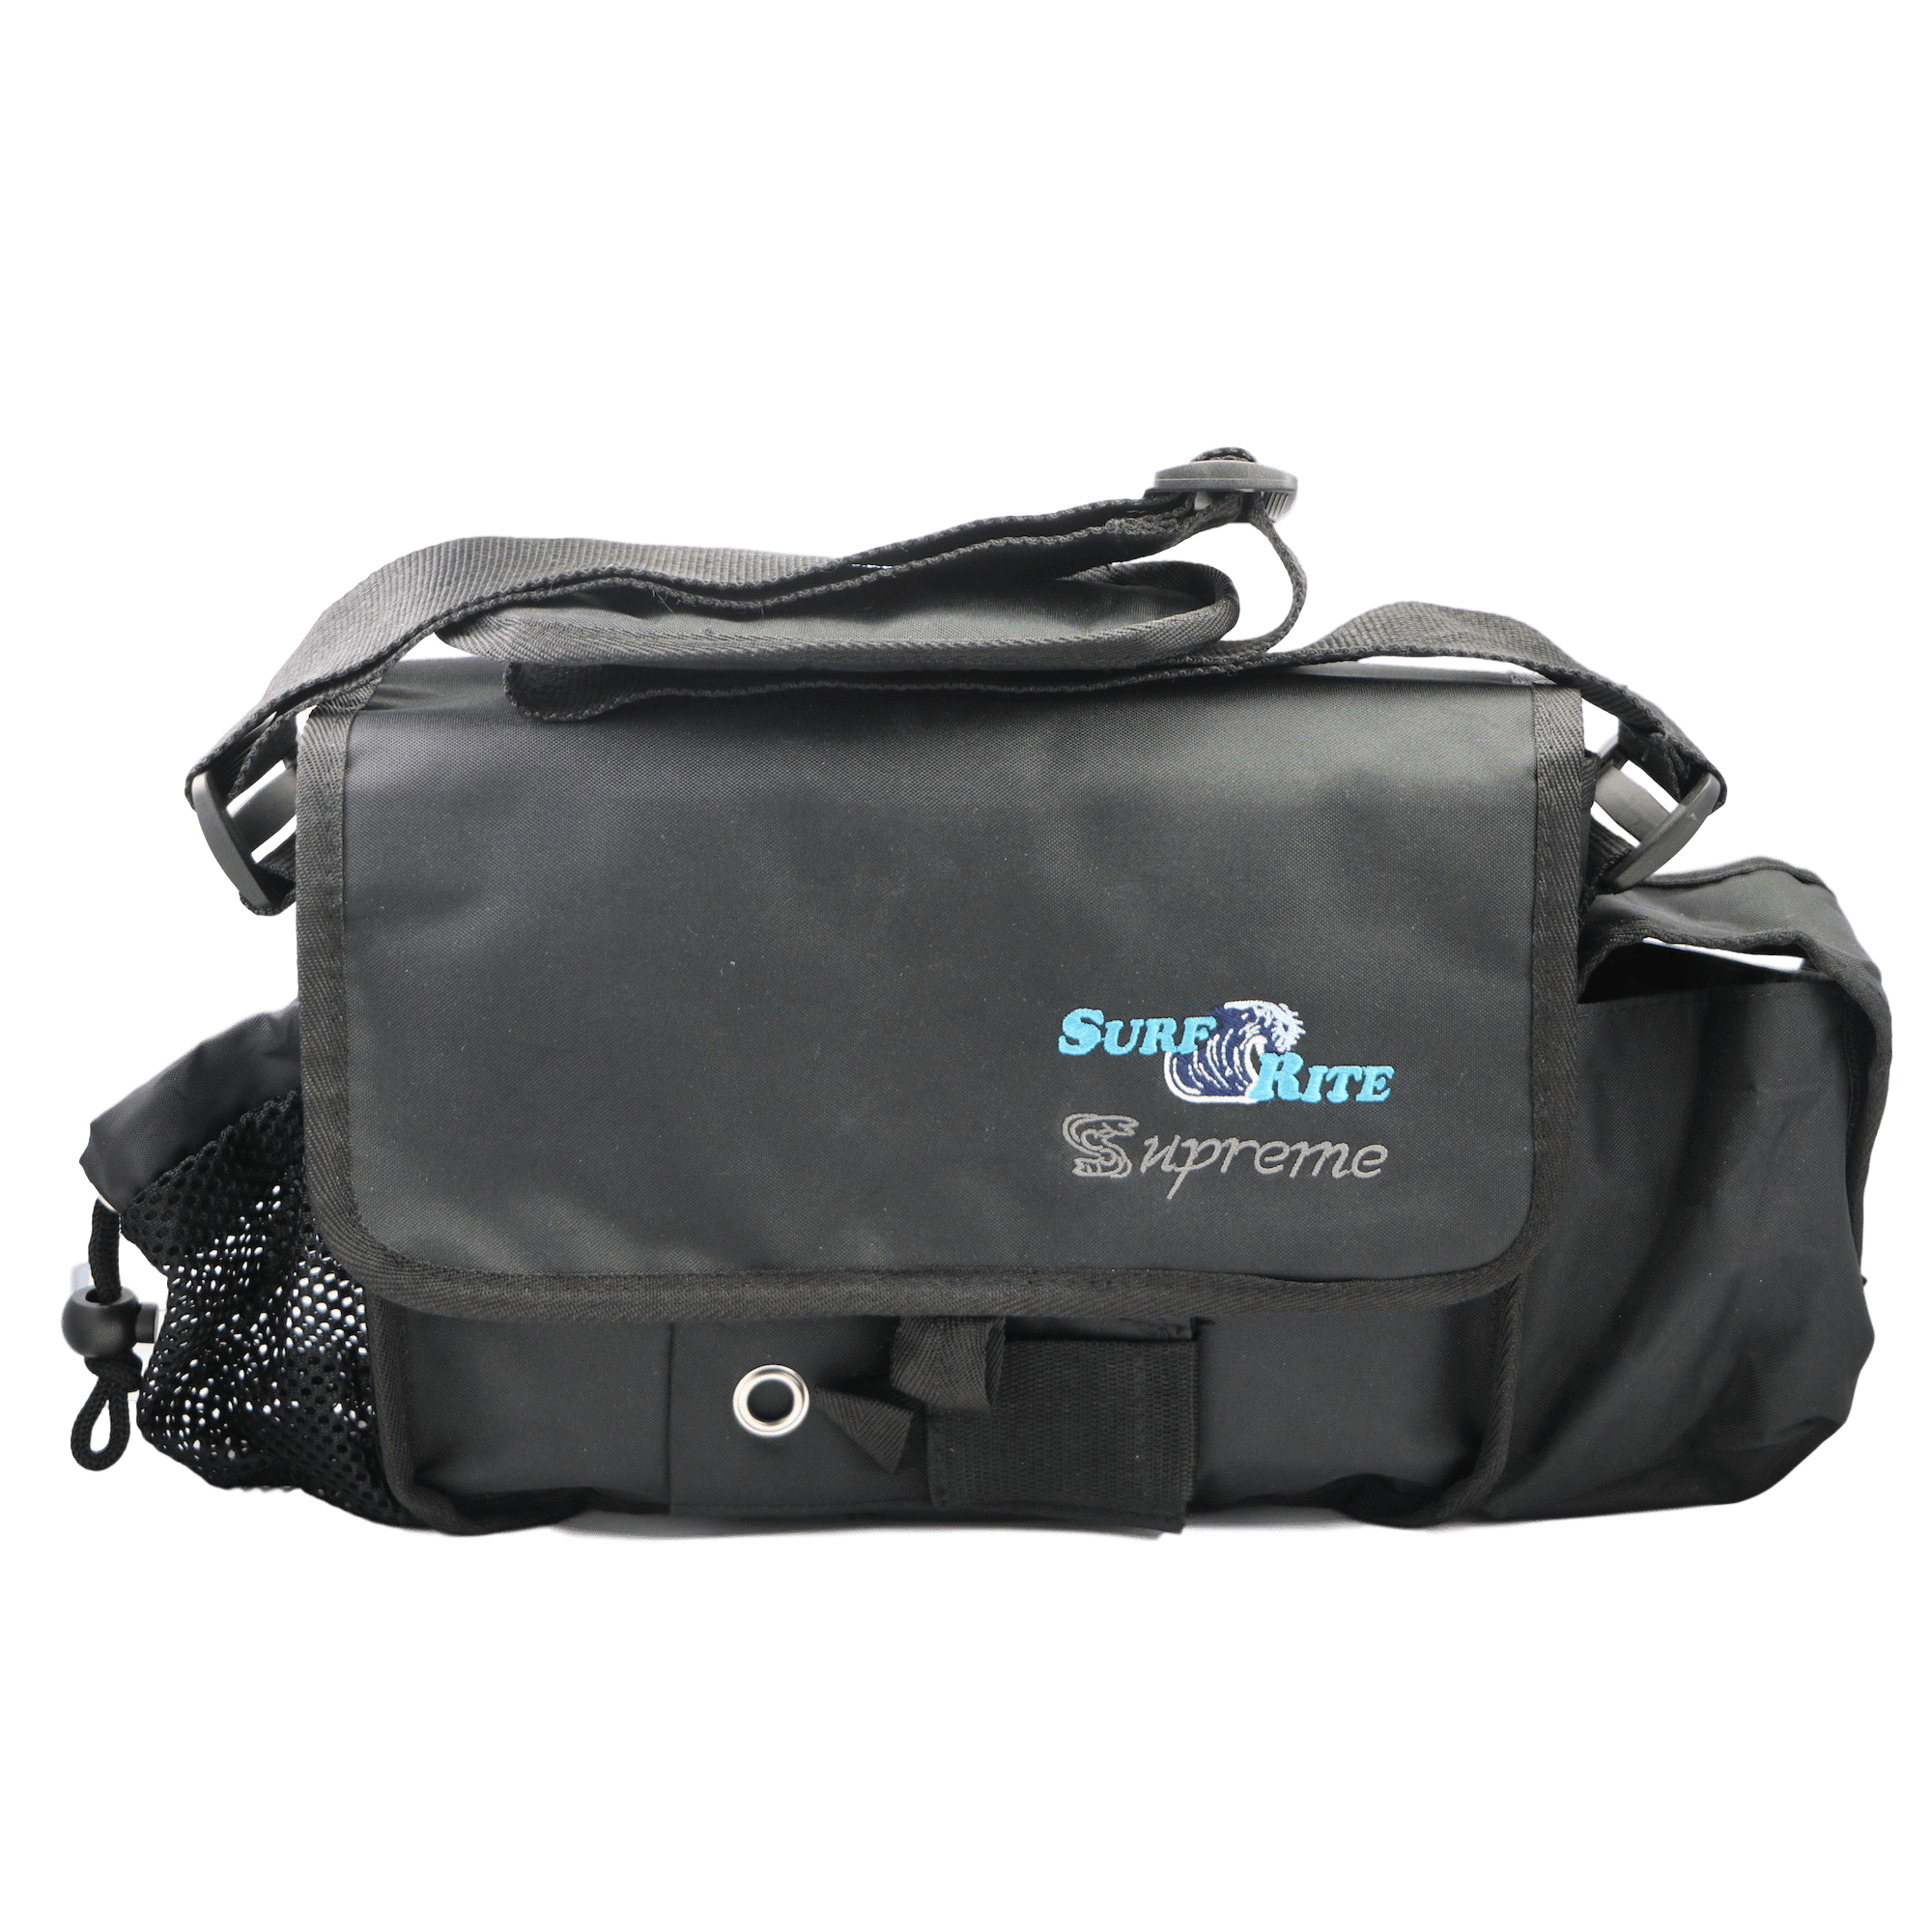 Fishing Surf Bags for sale